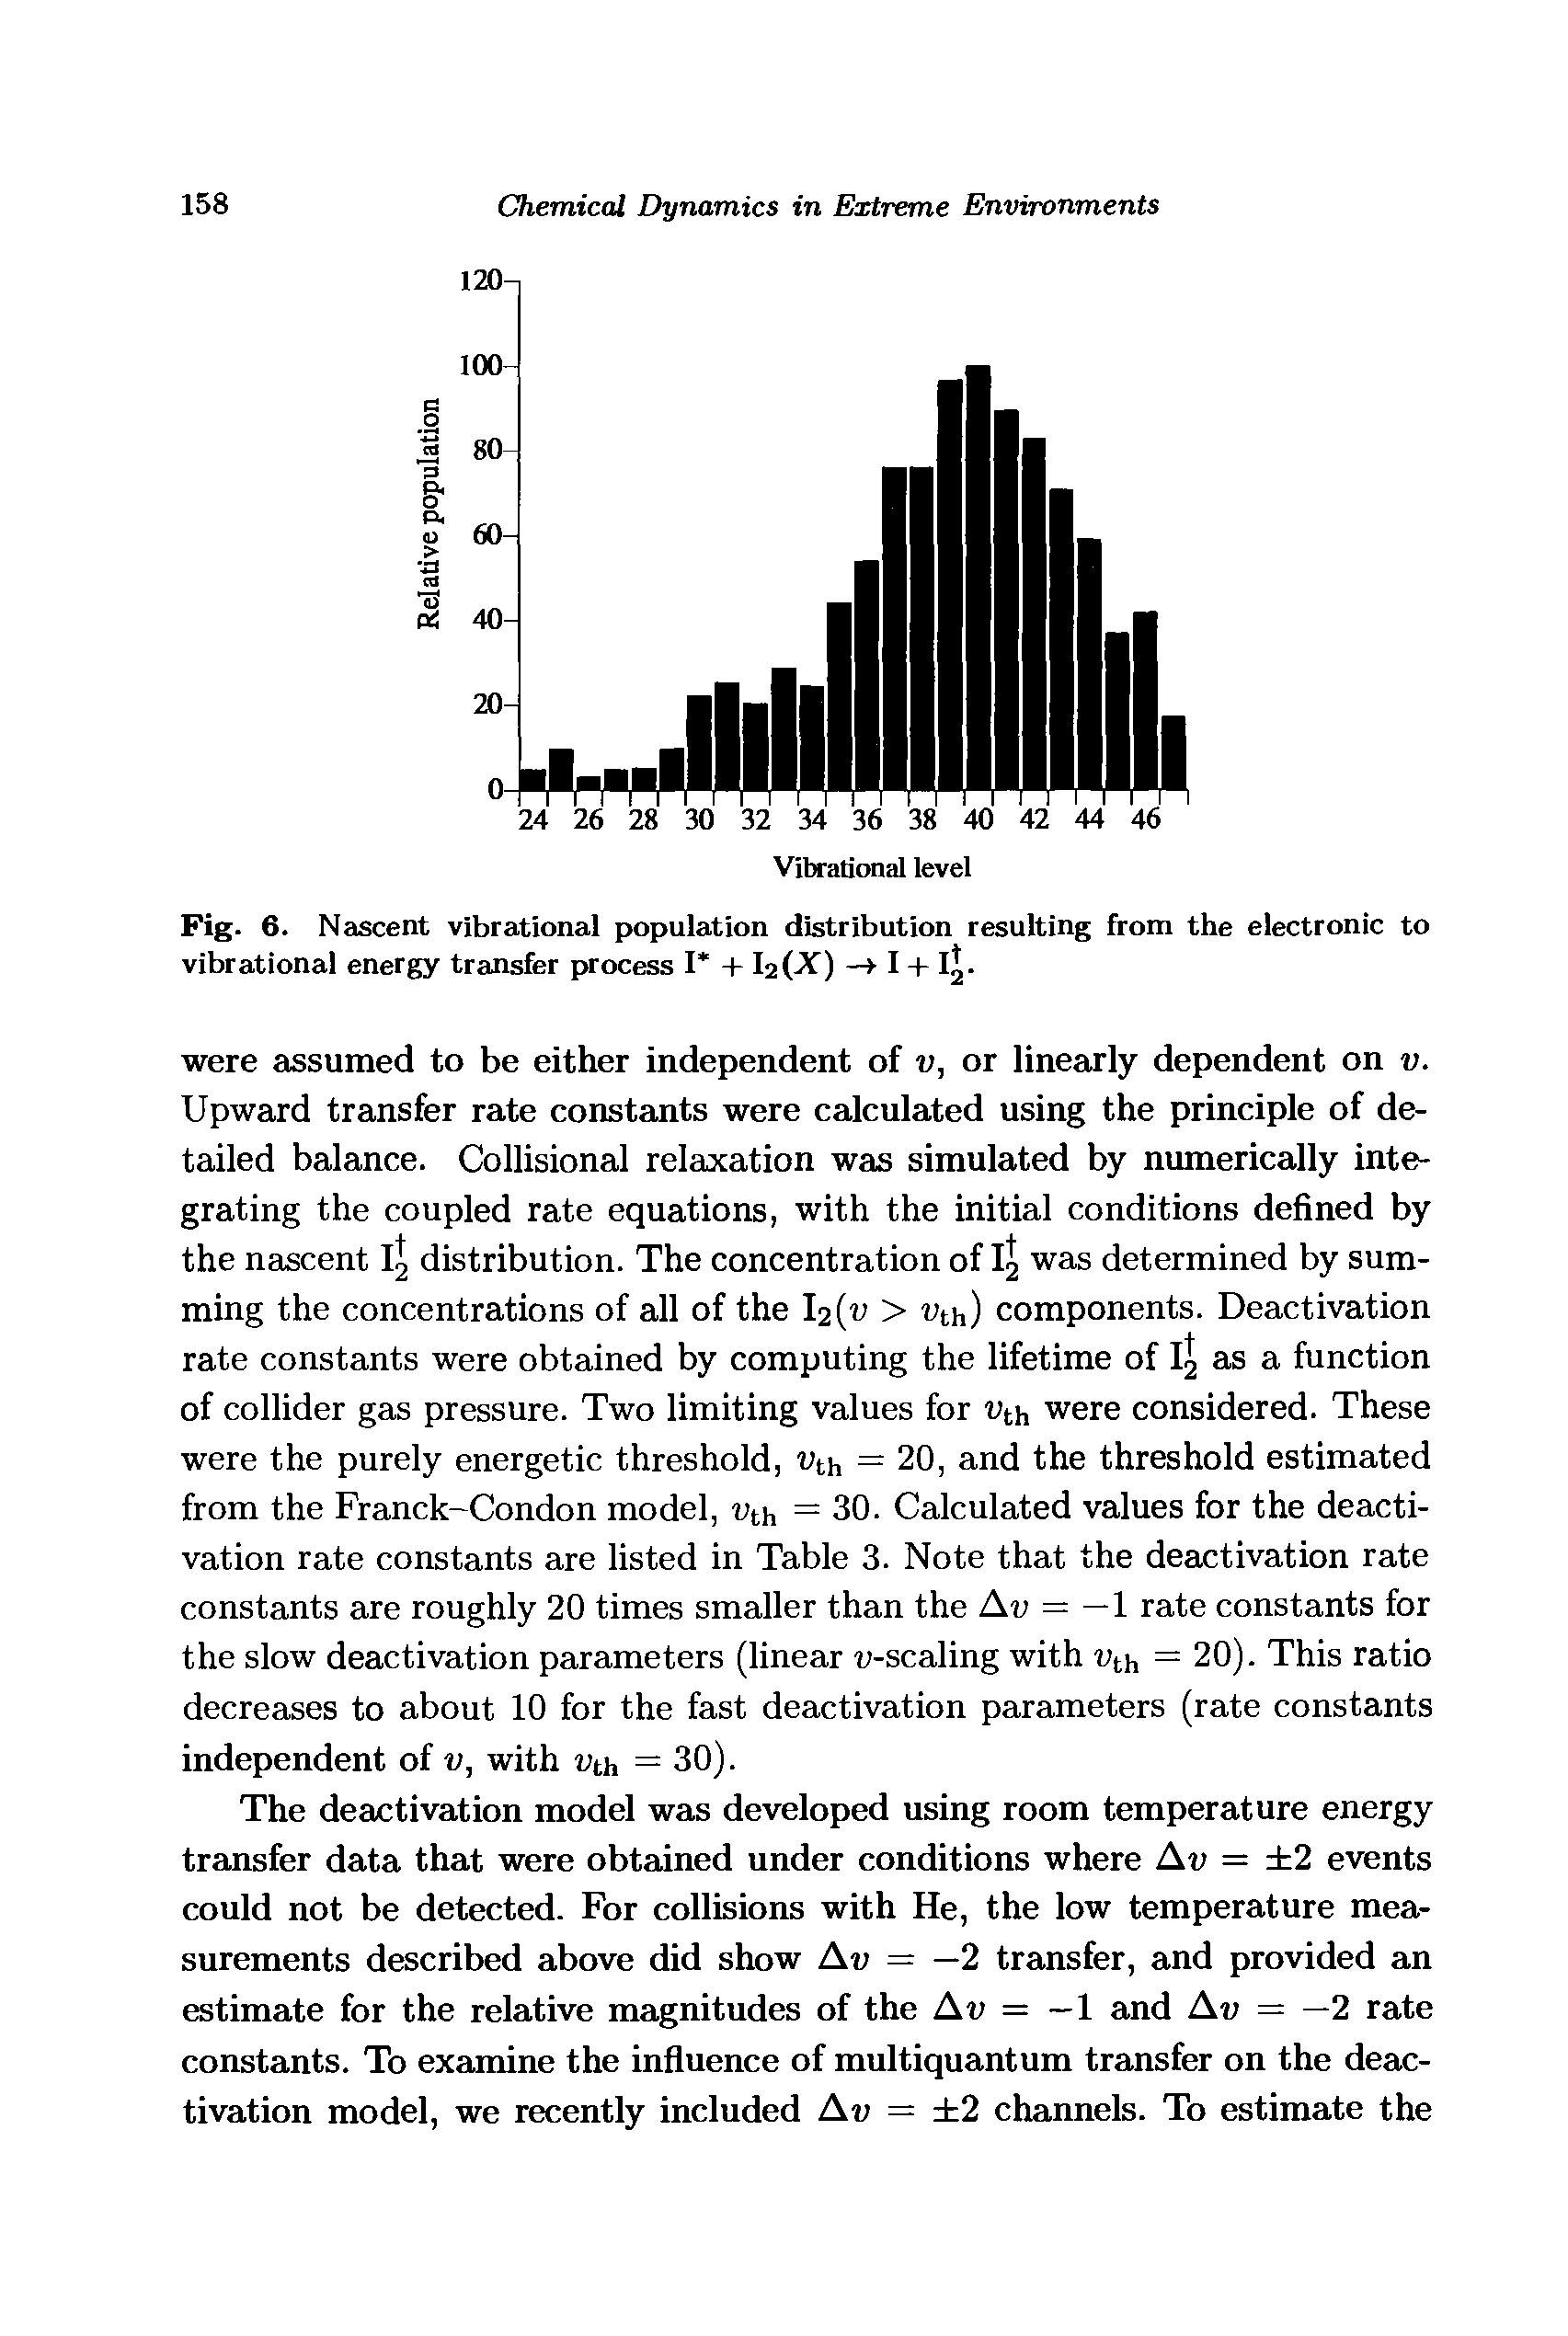 Fig. 6. Nascent vibrational population distribution resulting from the electronic to vibrational energy transfer process I + I2(.X )...